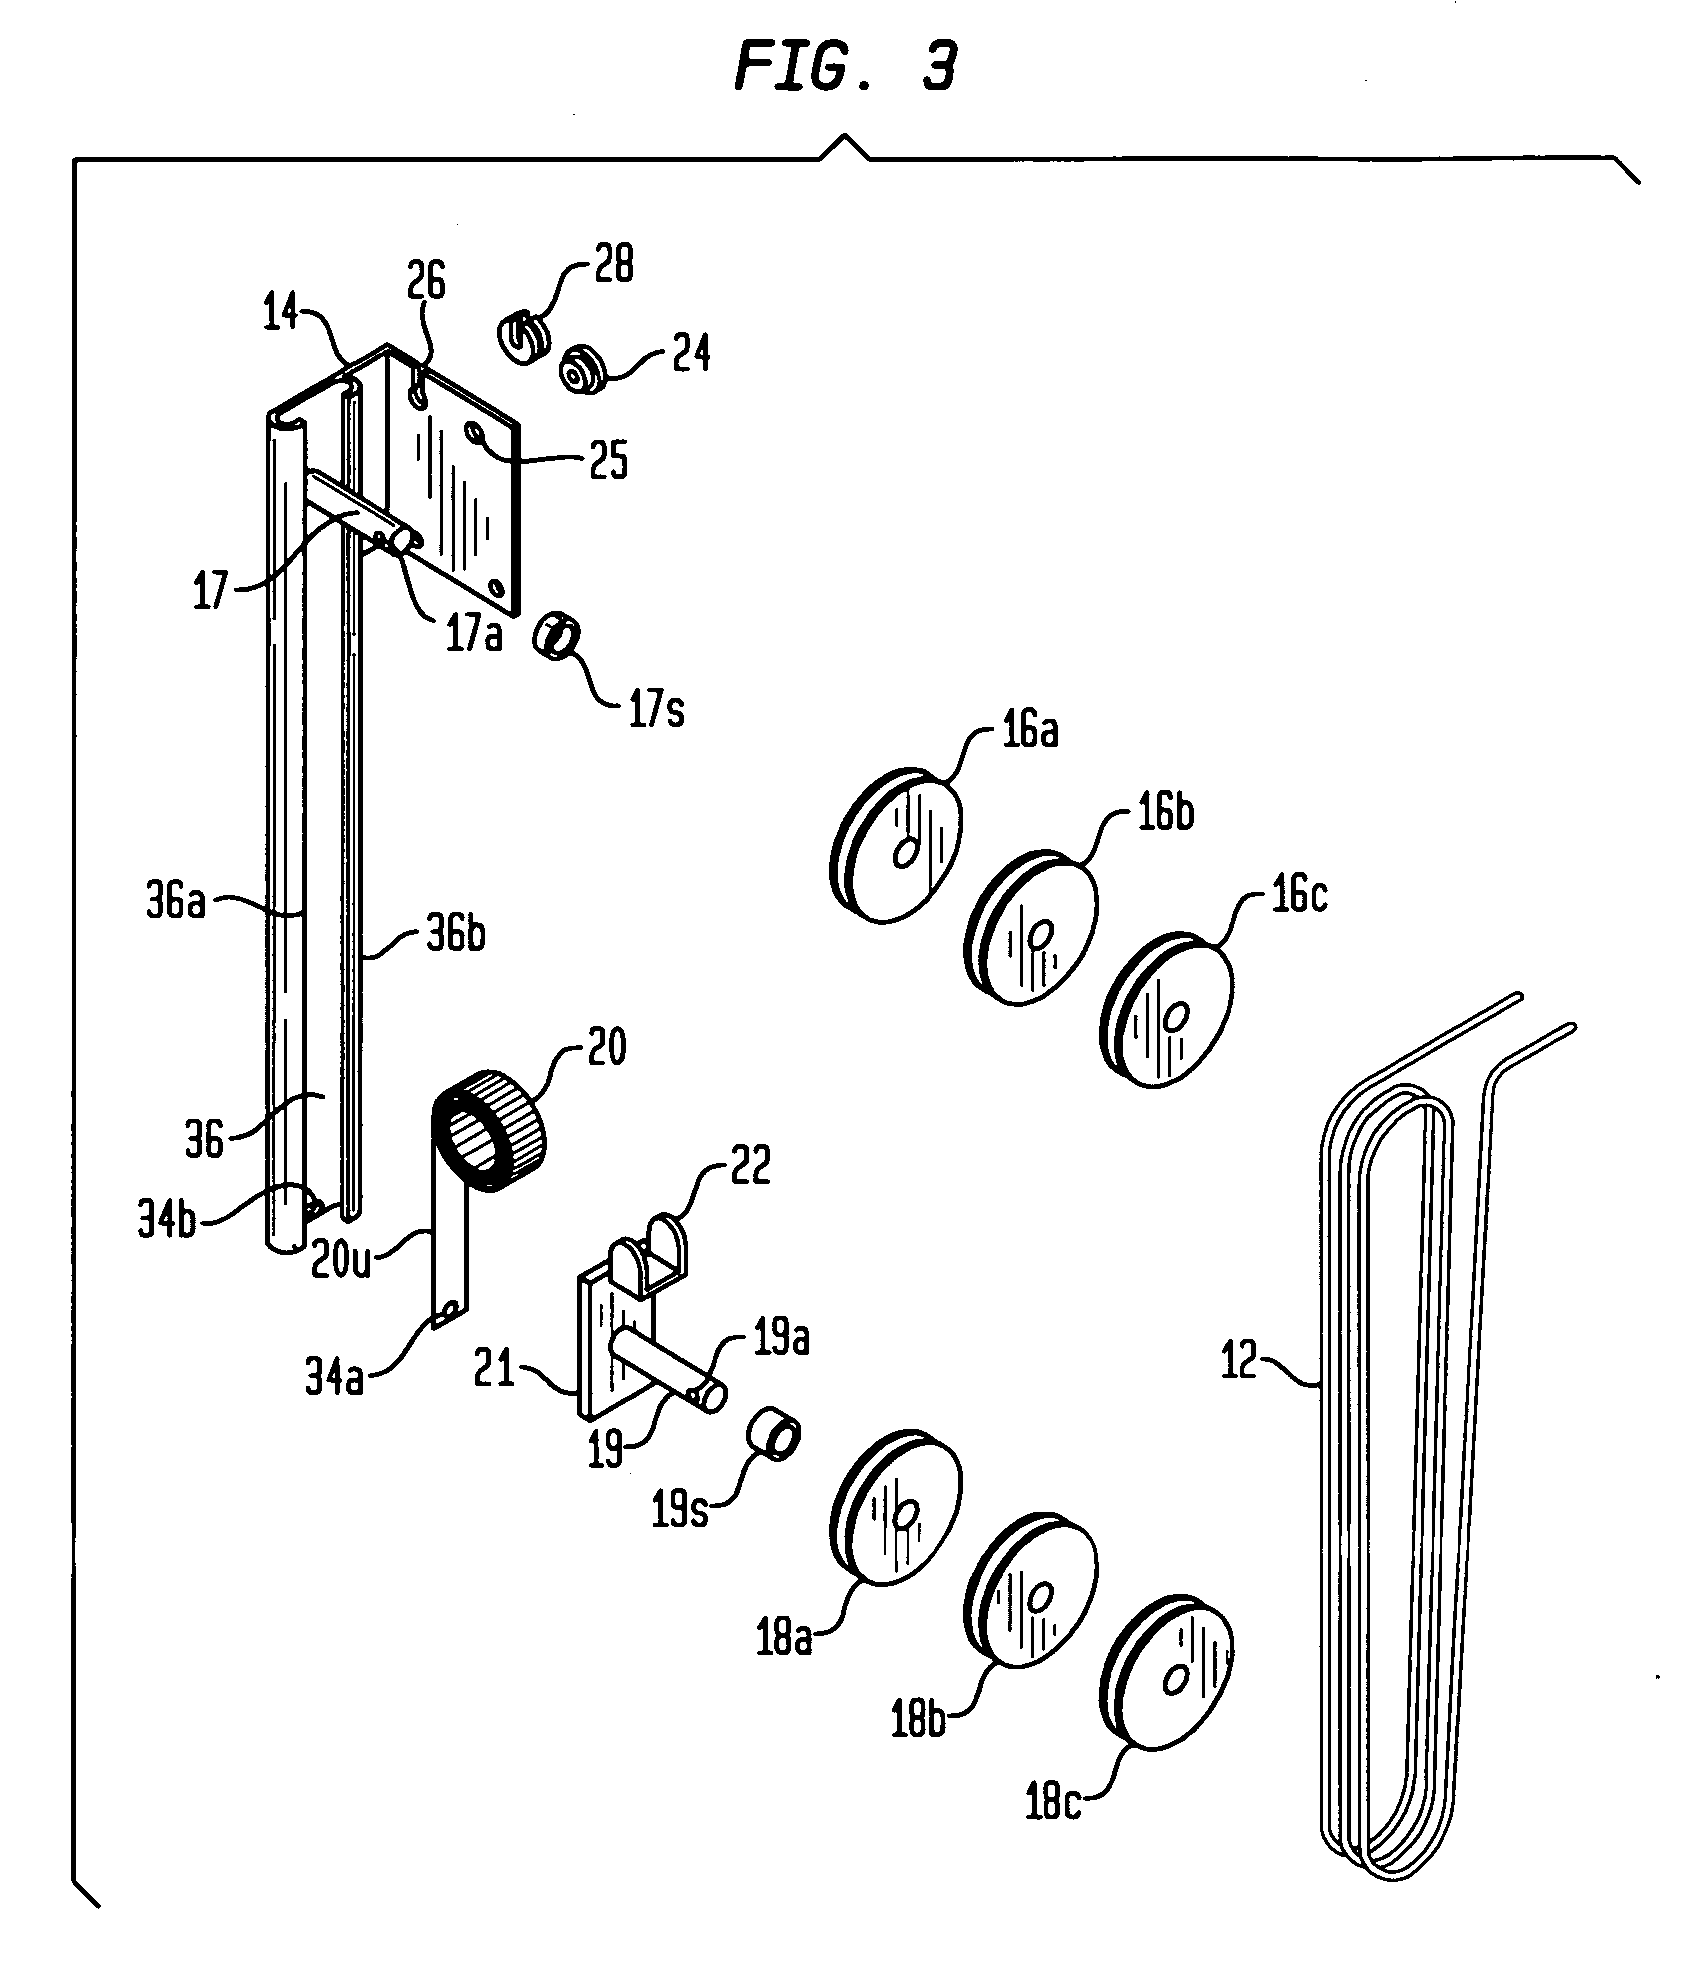 Apparatus for secure display of small electronic devices having an essential signal or power cord